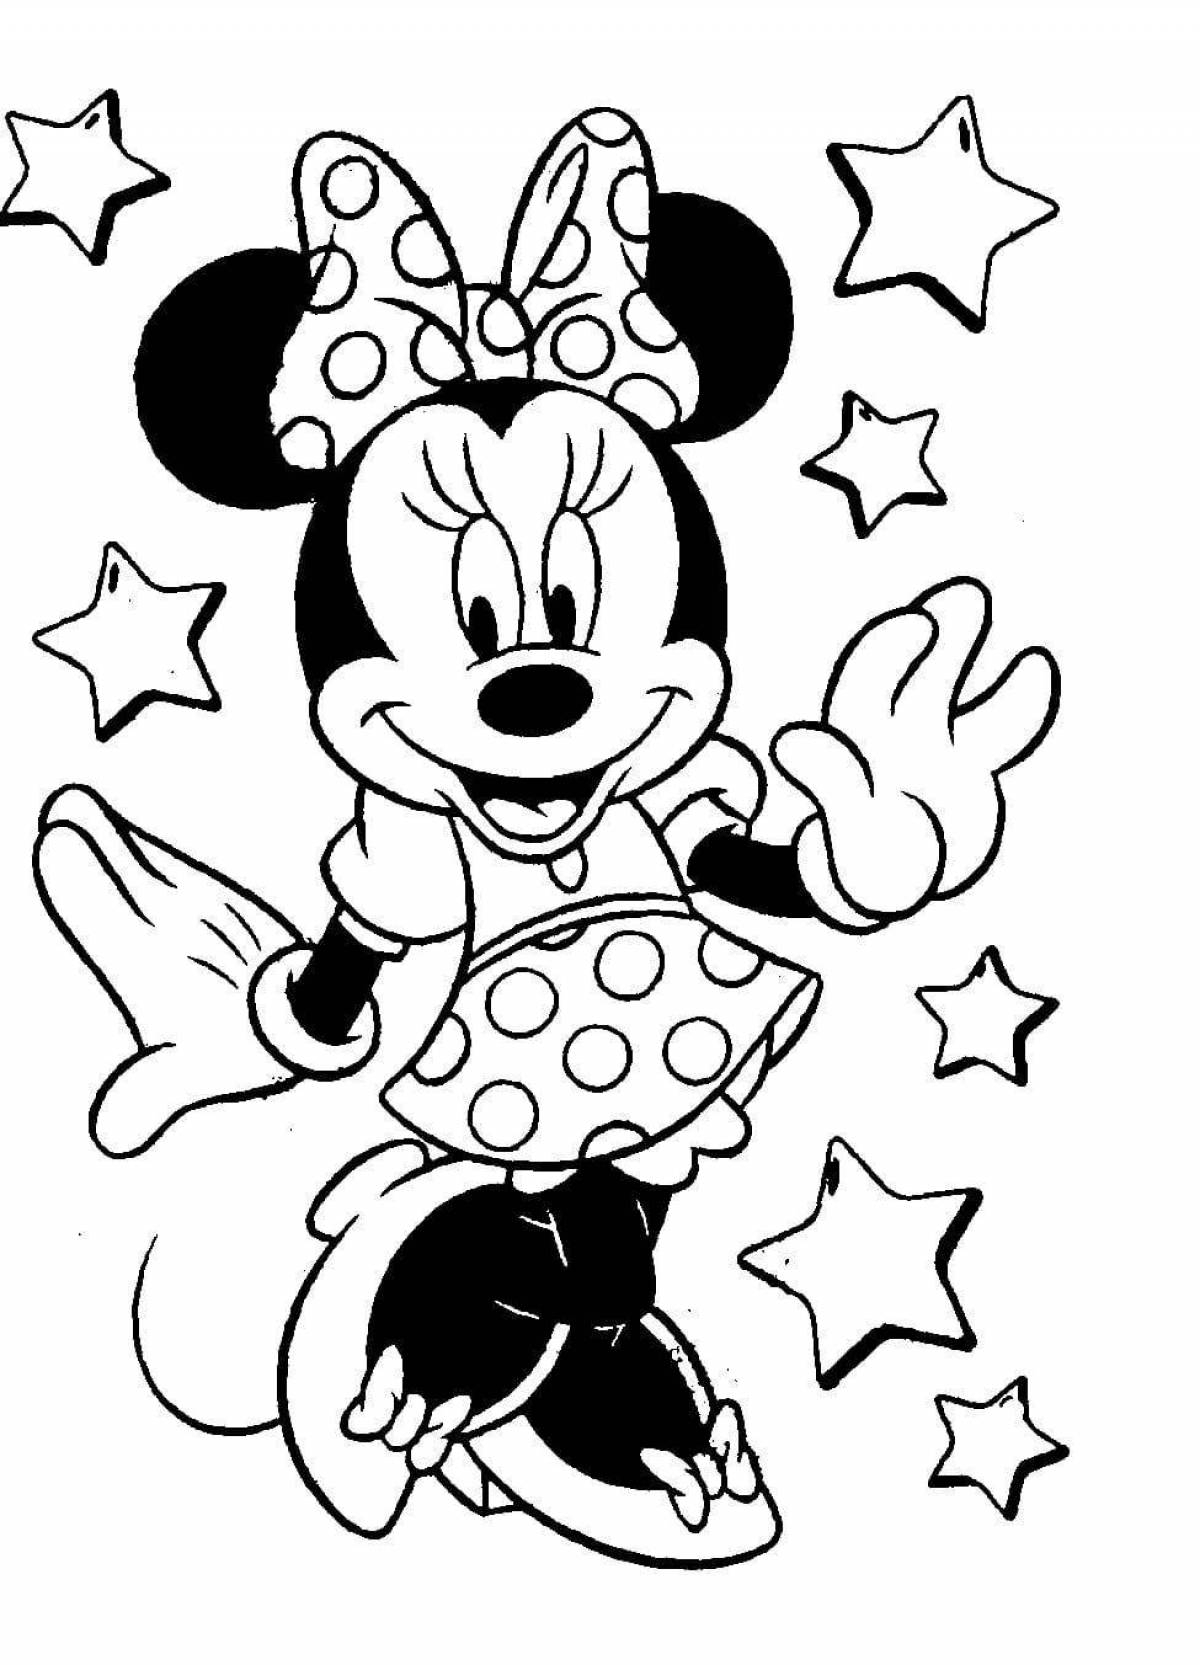 Minnie mouse funny coloring book